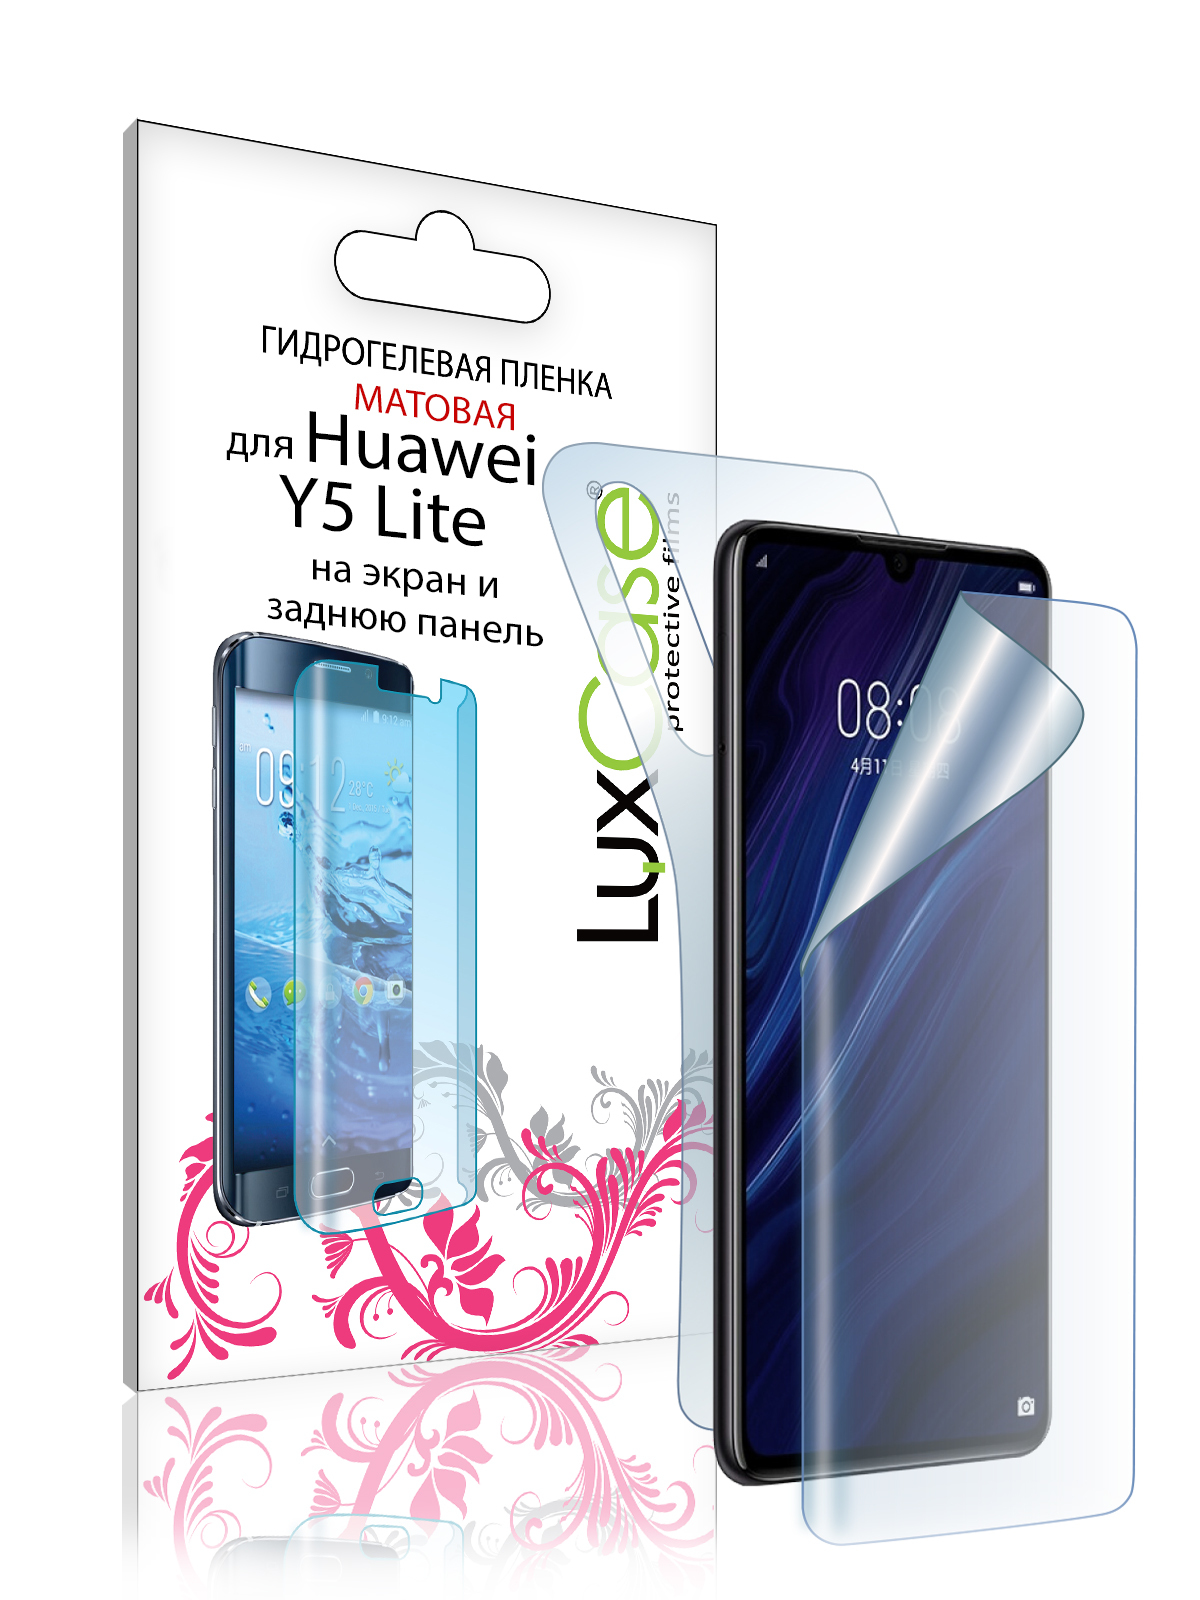 Пленка гидрогелевая LuxCase для Huawei Y5 Lite 0.14mm Front and Back Matte 86764 гидрогелевая пленка luxcase для huawei y5 lite 0 14mm front and back matte 86764